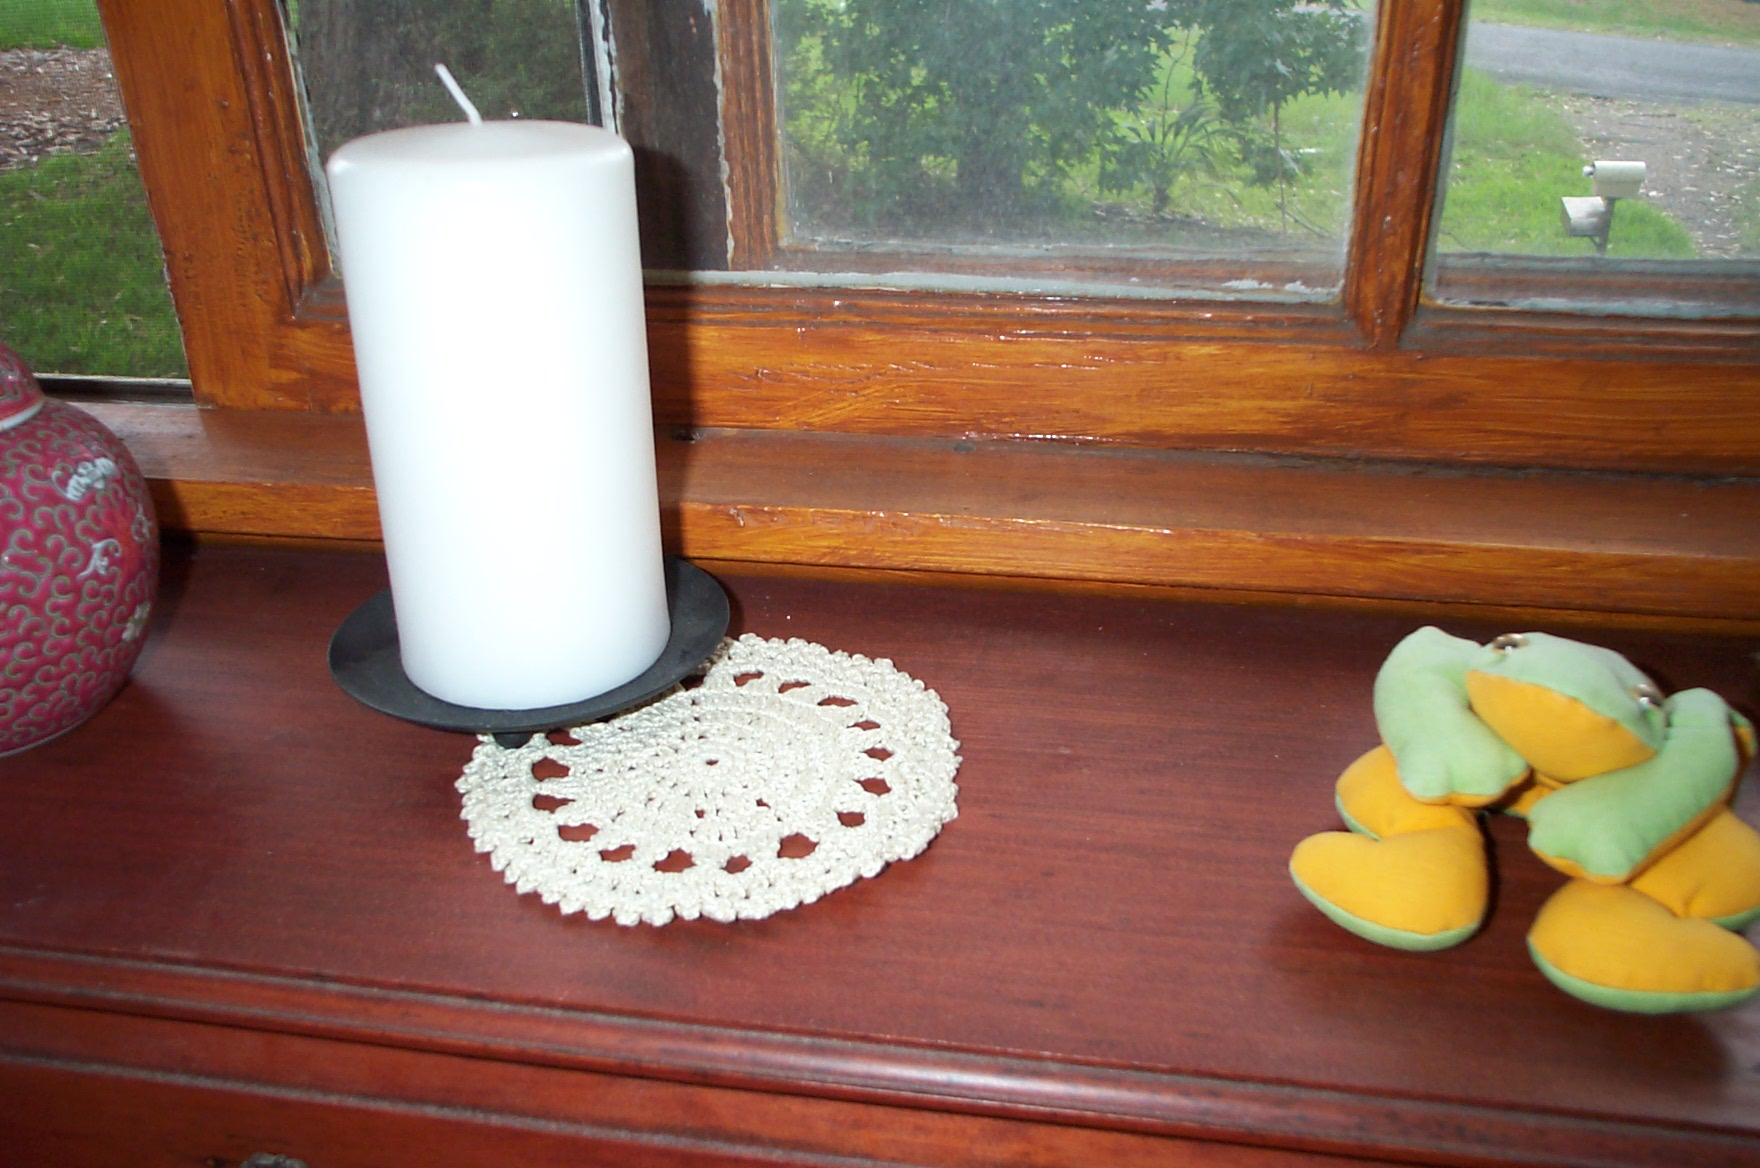 Small doily to protect wood from the candle holder